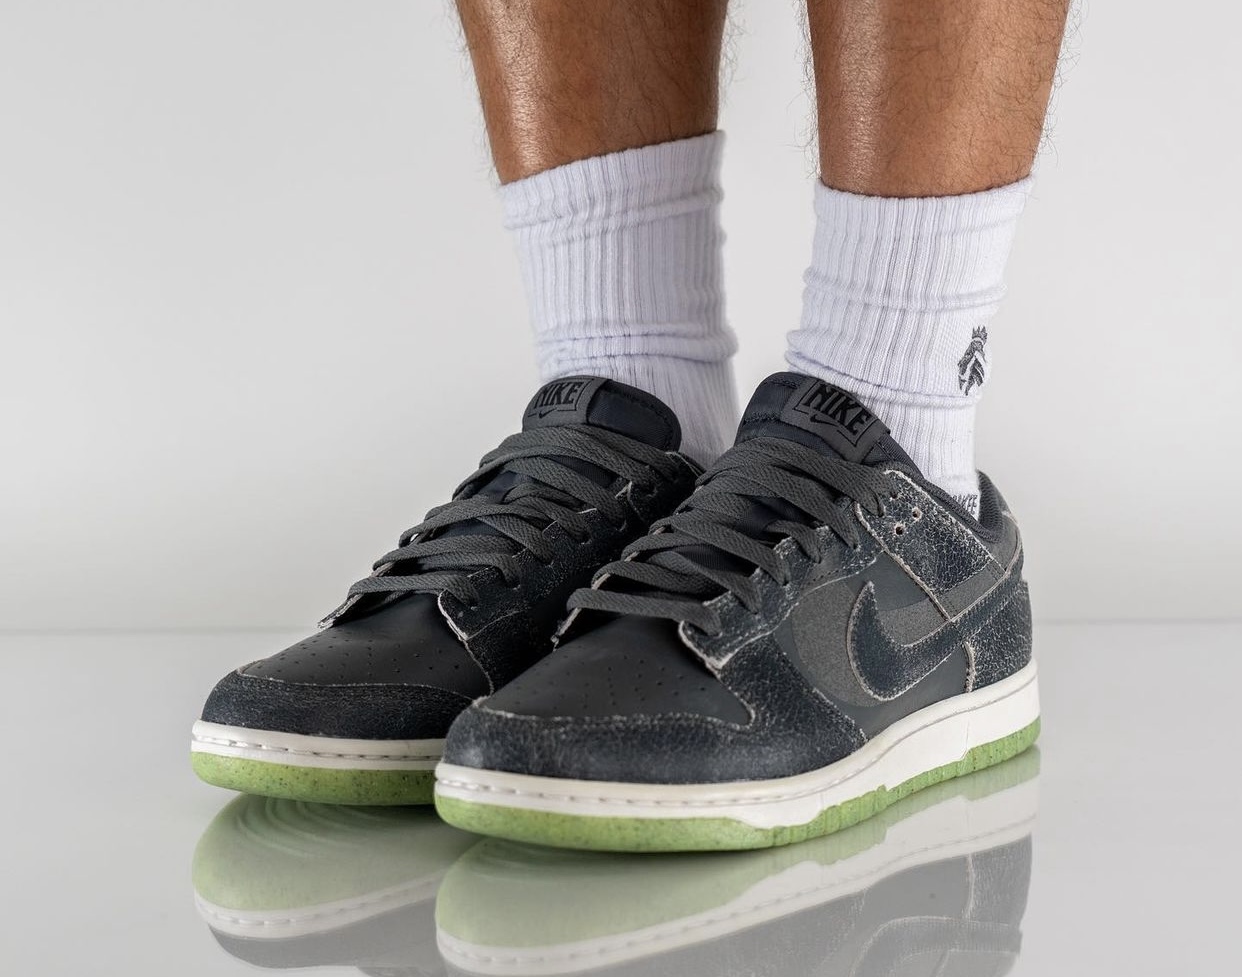 Nike Dunk Low Iron Grey DQ7681 001 Release Date On Feet 1